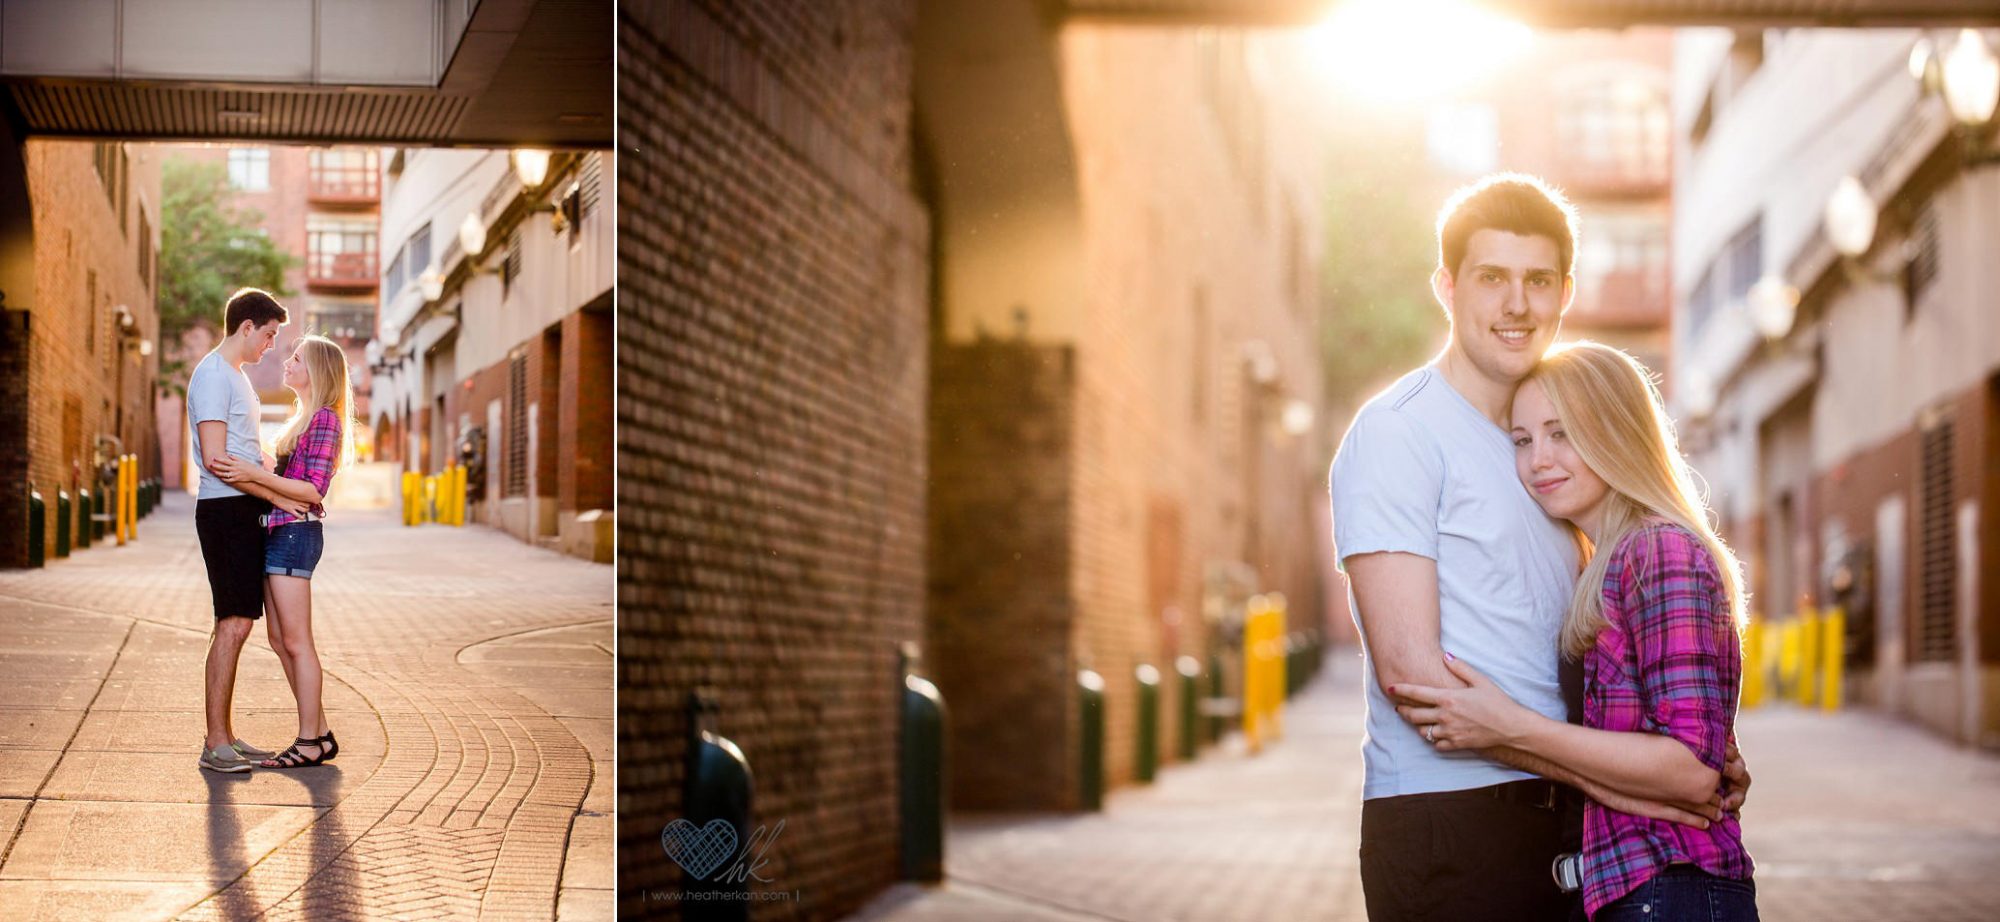 Engagement Session near Downtown MSU